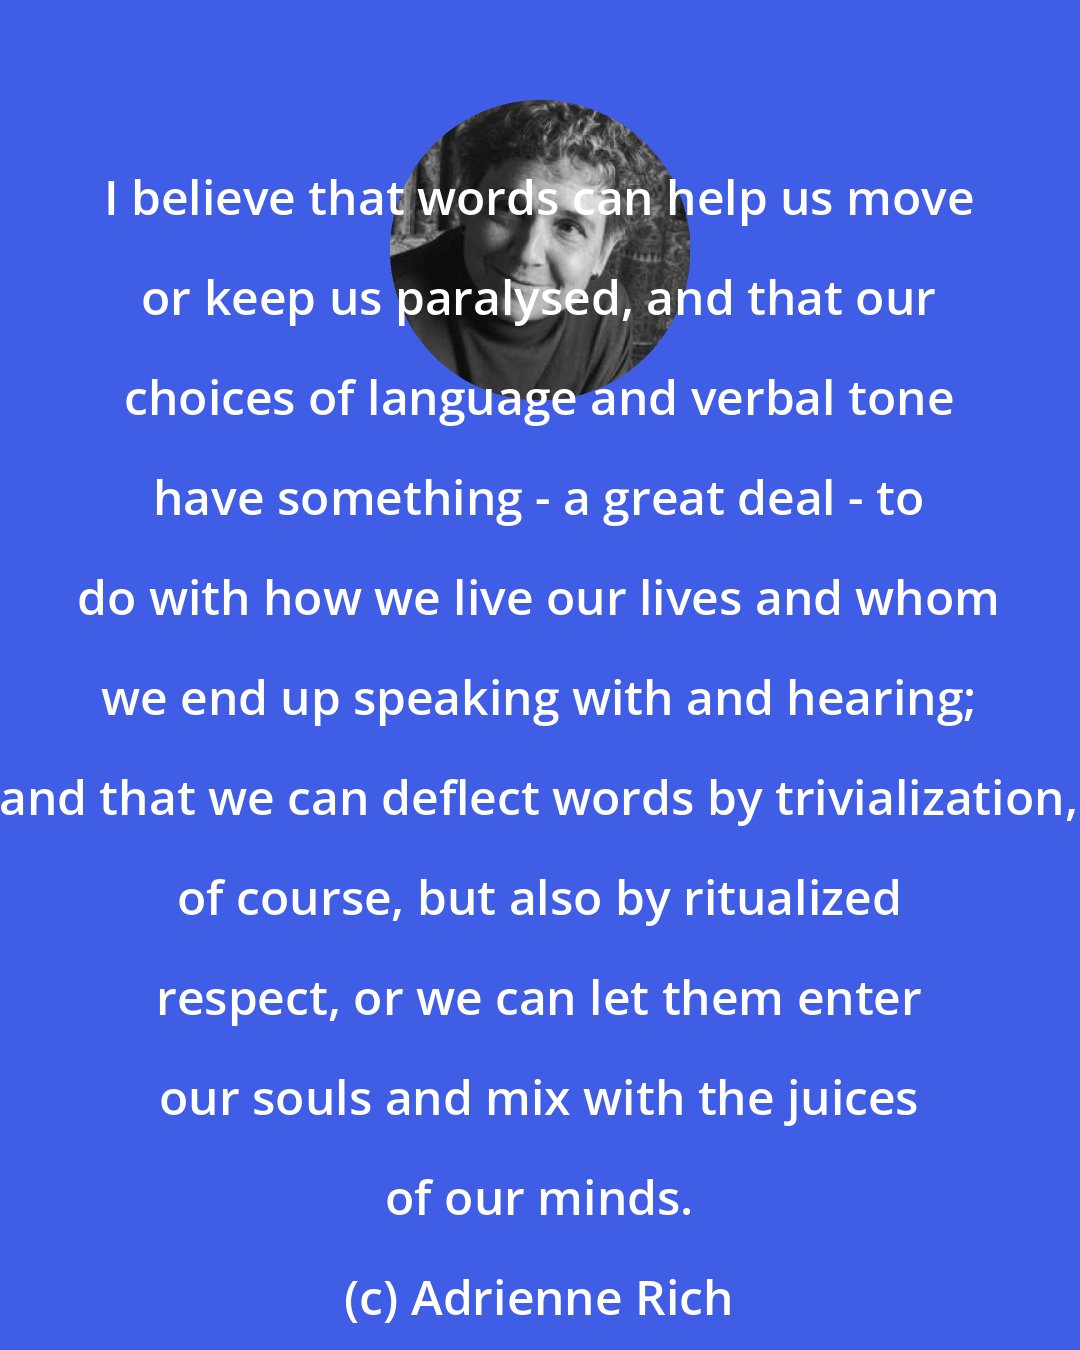 Adrienne Rich: I believe that words can help us move or keep us paralysed, and that our choices of language and verbal tone have something - a great deal - to do with how we live our lives and whom we end up speaking with and hearing; and that we can deflect words by trivialization, of course, but also by ritualized respect, or we can let them enter our souls and mix with the juices of our minds.